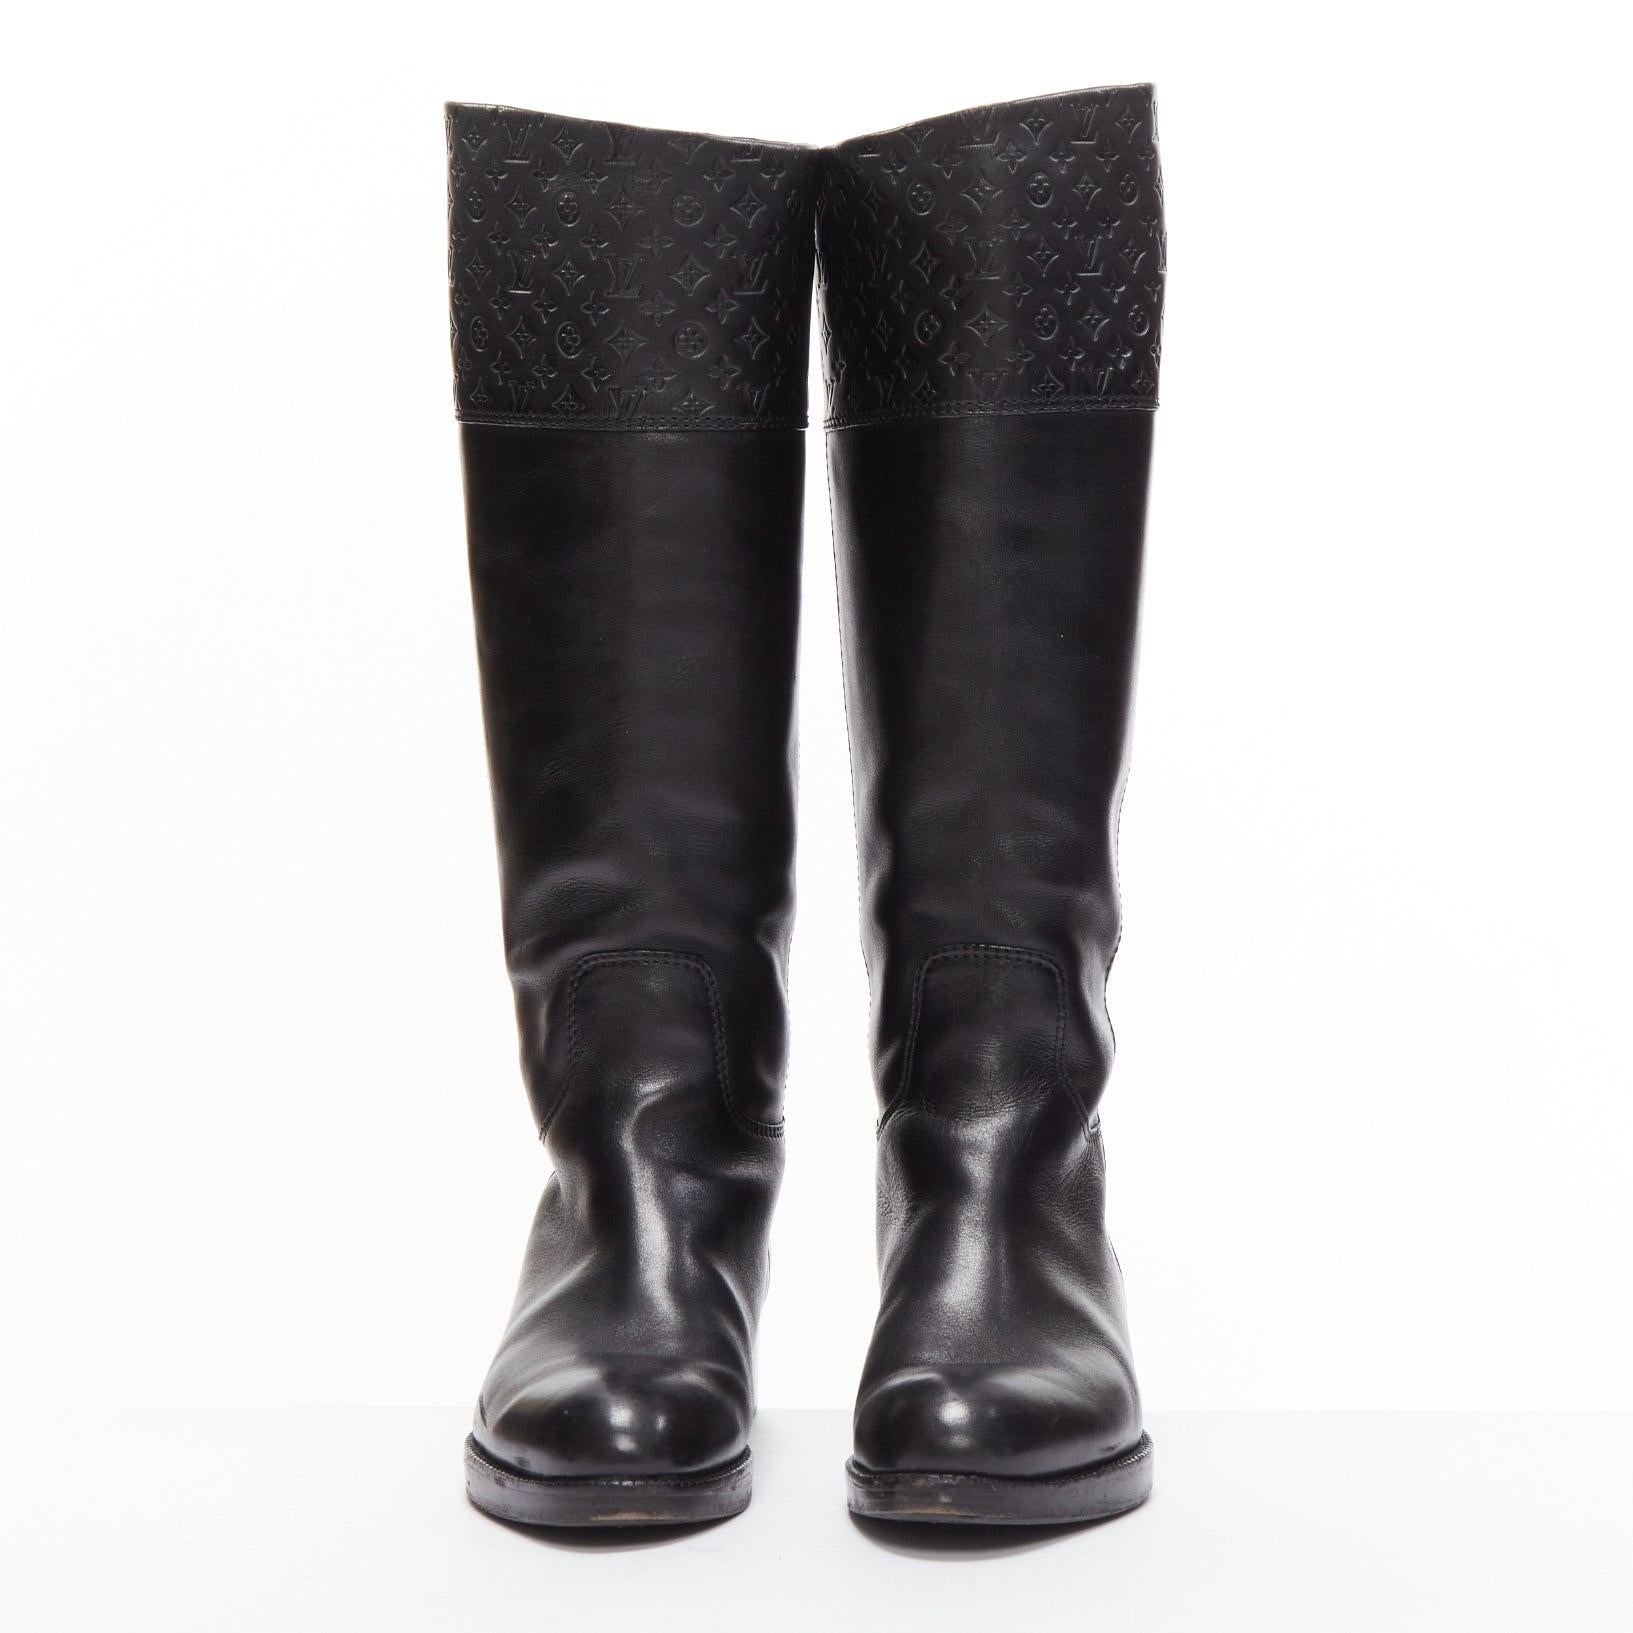 Black LOUIS VUITTON black LV monogram embossed leather pull on riding boots EU37.5